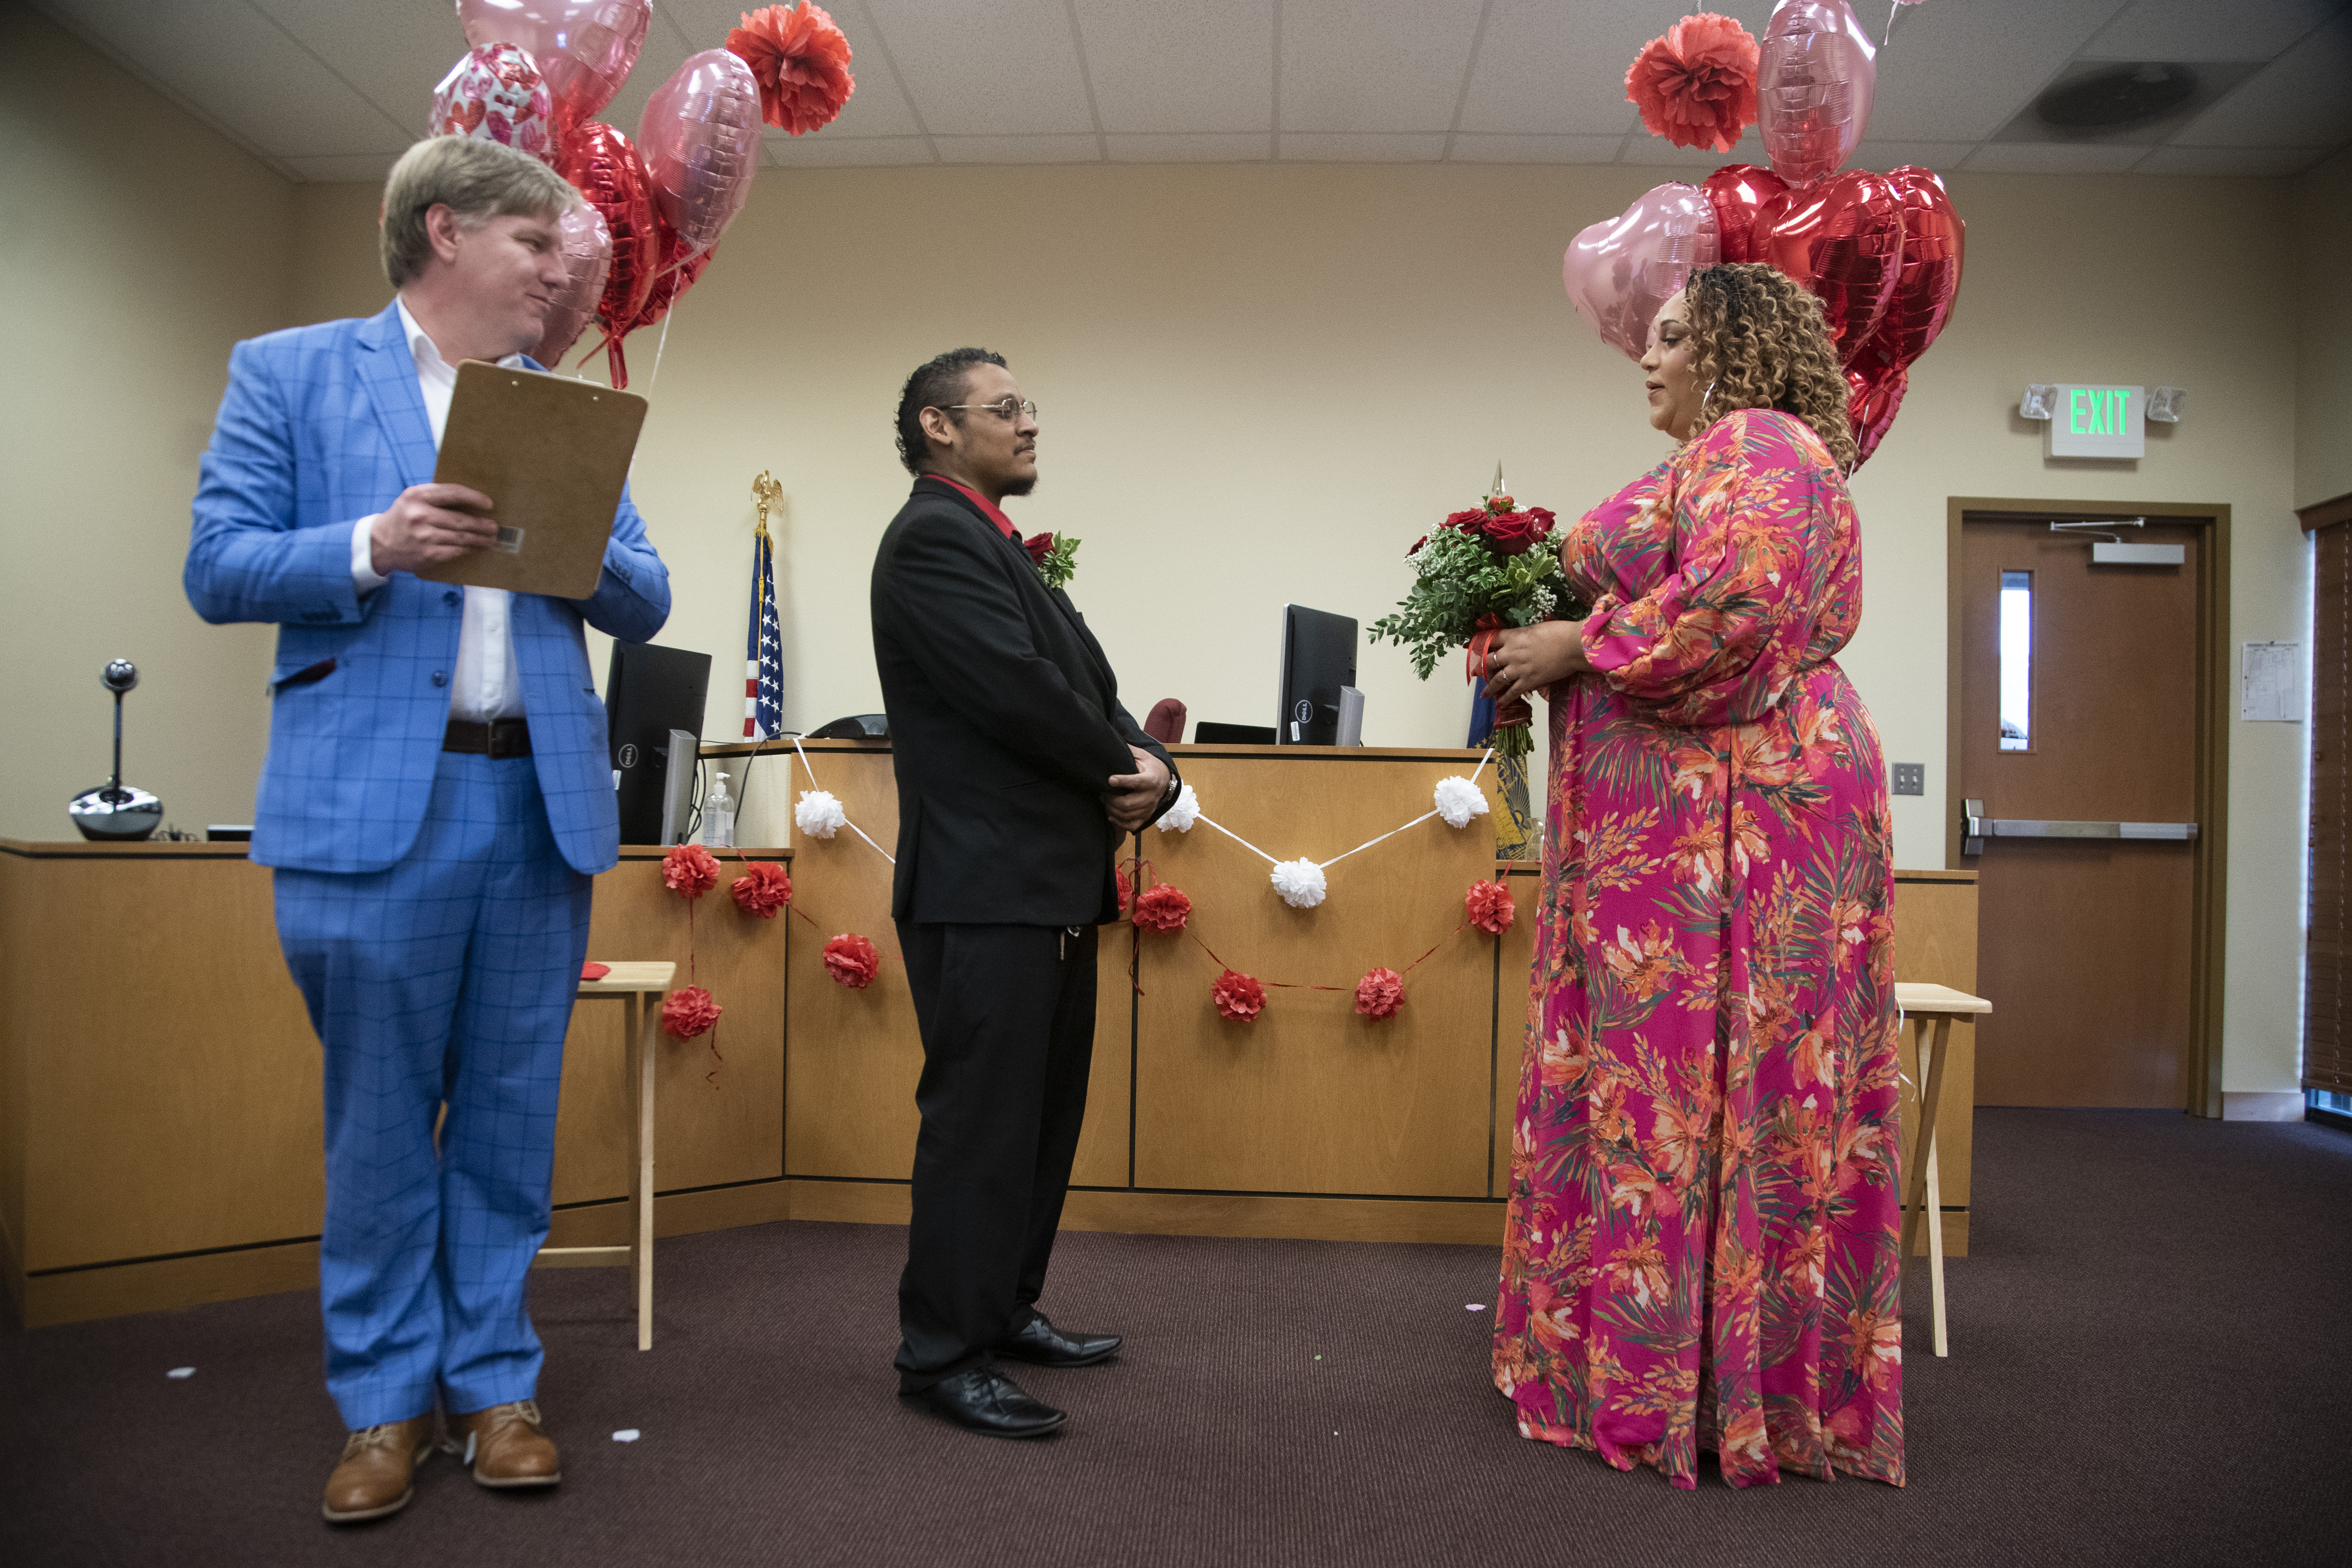 Giovani Emmanuel and Sarah Smith were married by Justice of the Peace Justin Kidd, left, at the Marion County Justice Court in Salem, February 14, 2023. Beth Nakamura/The Oregonian